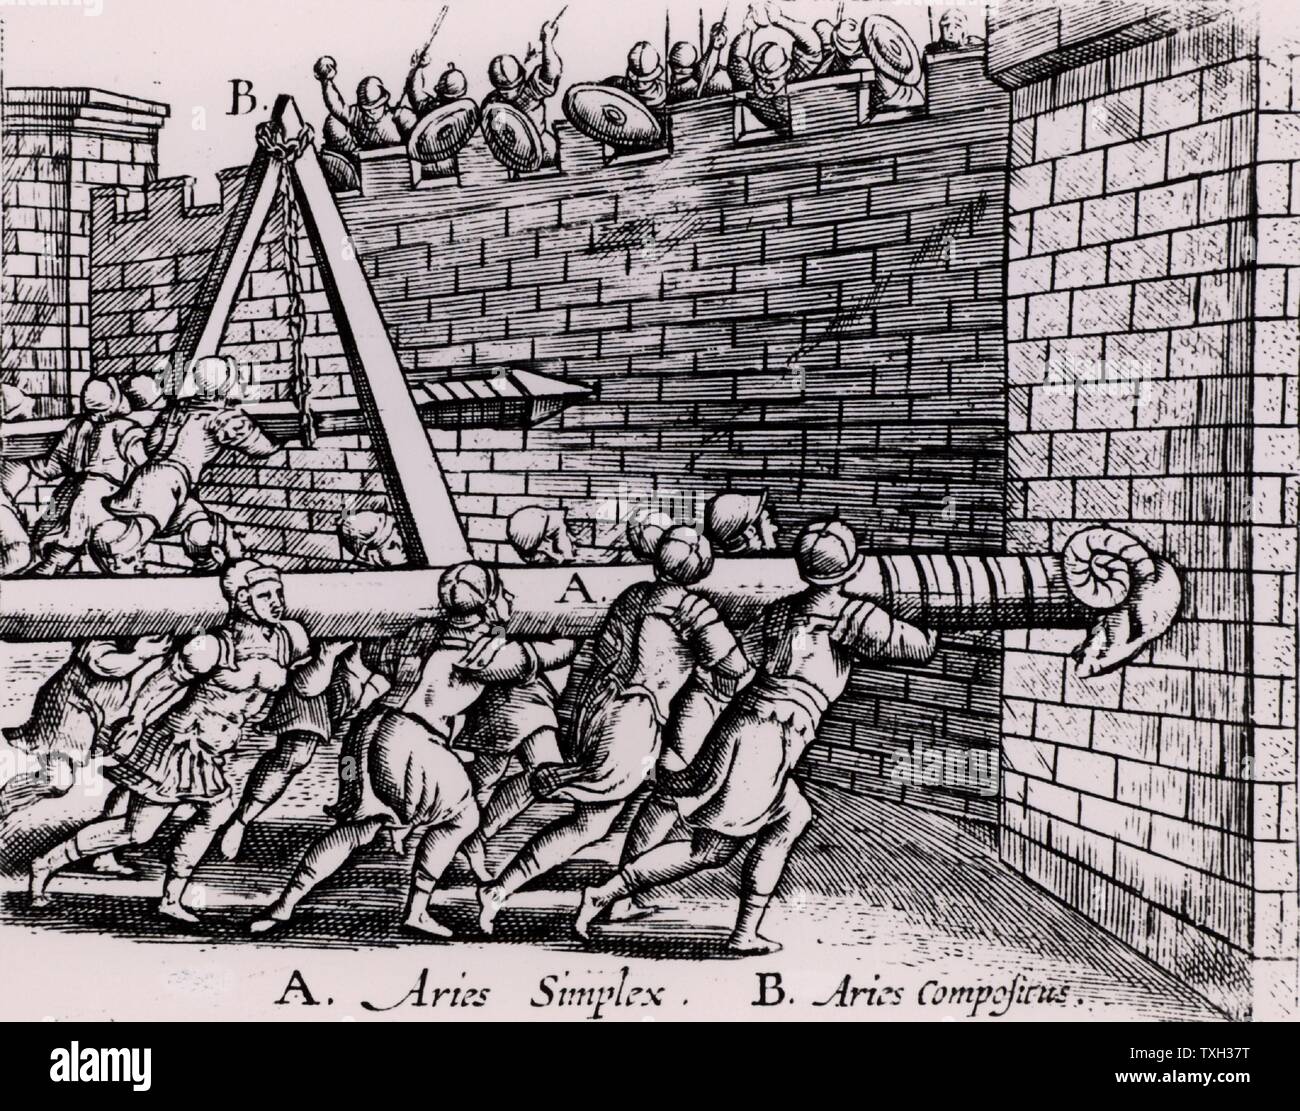 Roman soldiers using two forms of battering ram against the walls of a fortress.  A, in the foreground, is the simple form resting on the men's shoulders, while the one at B is hung on a chain hanging from a frame, so enabling the men to concentrate their strength on thrusting the battering ram forward.  From 'Poliorceticon sive de machinis tormentis telis' by Justus Lipsius (Joost Lips) (Antwerp, 1605). Engraving. Stock Photo